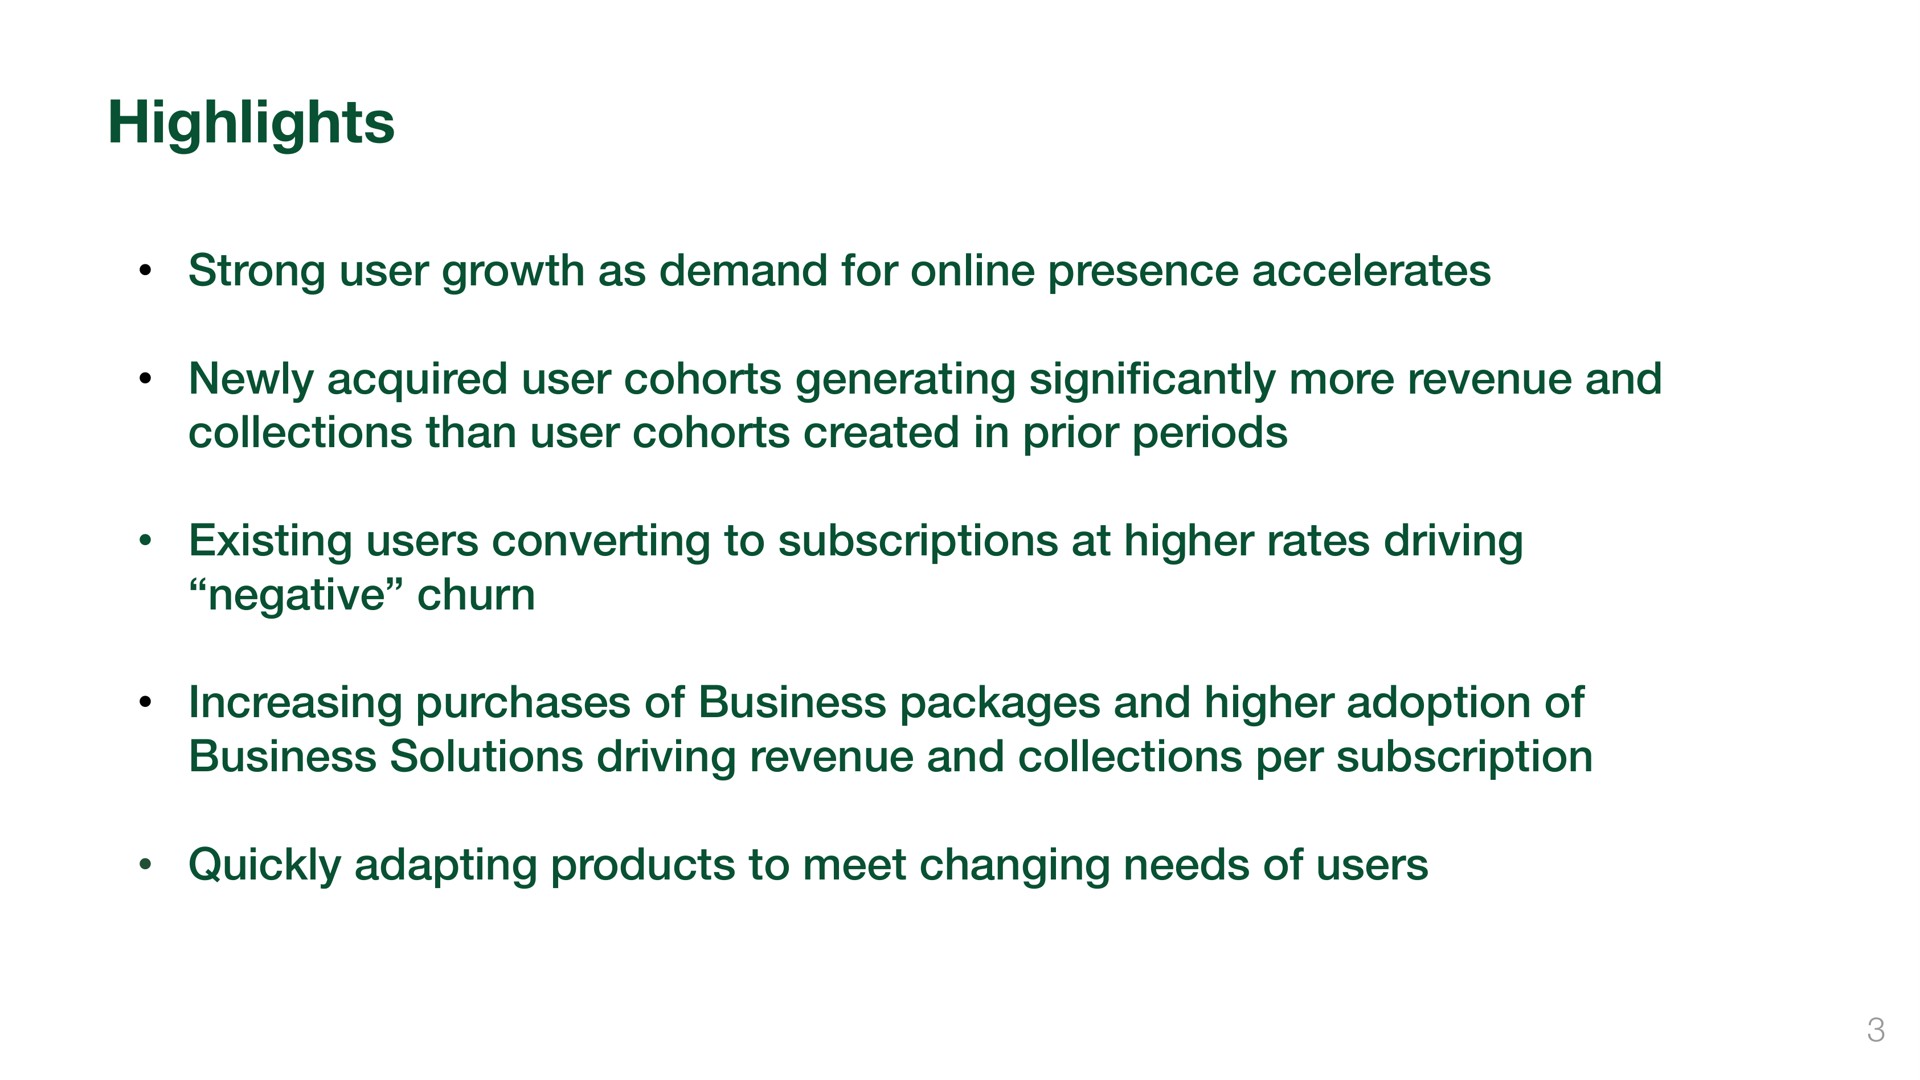 highlights strong user growth as demand for presence accelerates newly acquired user cohorts generating significantly more revenue and collections than user cohorts created in prior periods existing users converting to subscriptions at higher rates driving negative churn increasing purchases of business packages and higher adoption of business solutions driving revenue and collections per subscription quickly adapting products to meet changing needs of users | Wix